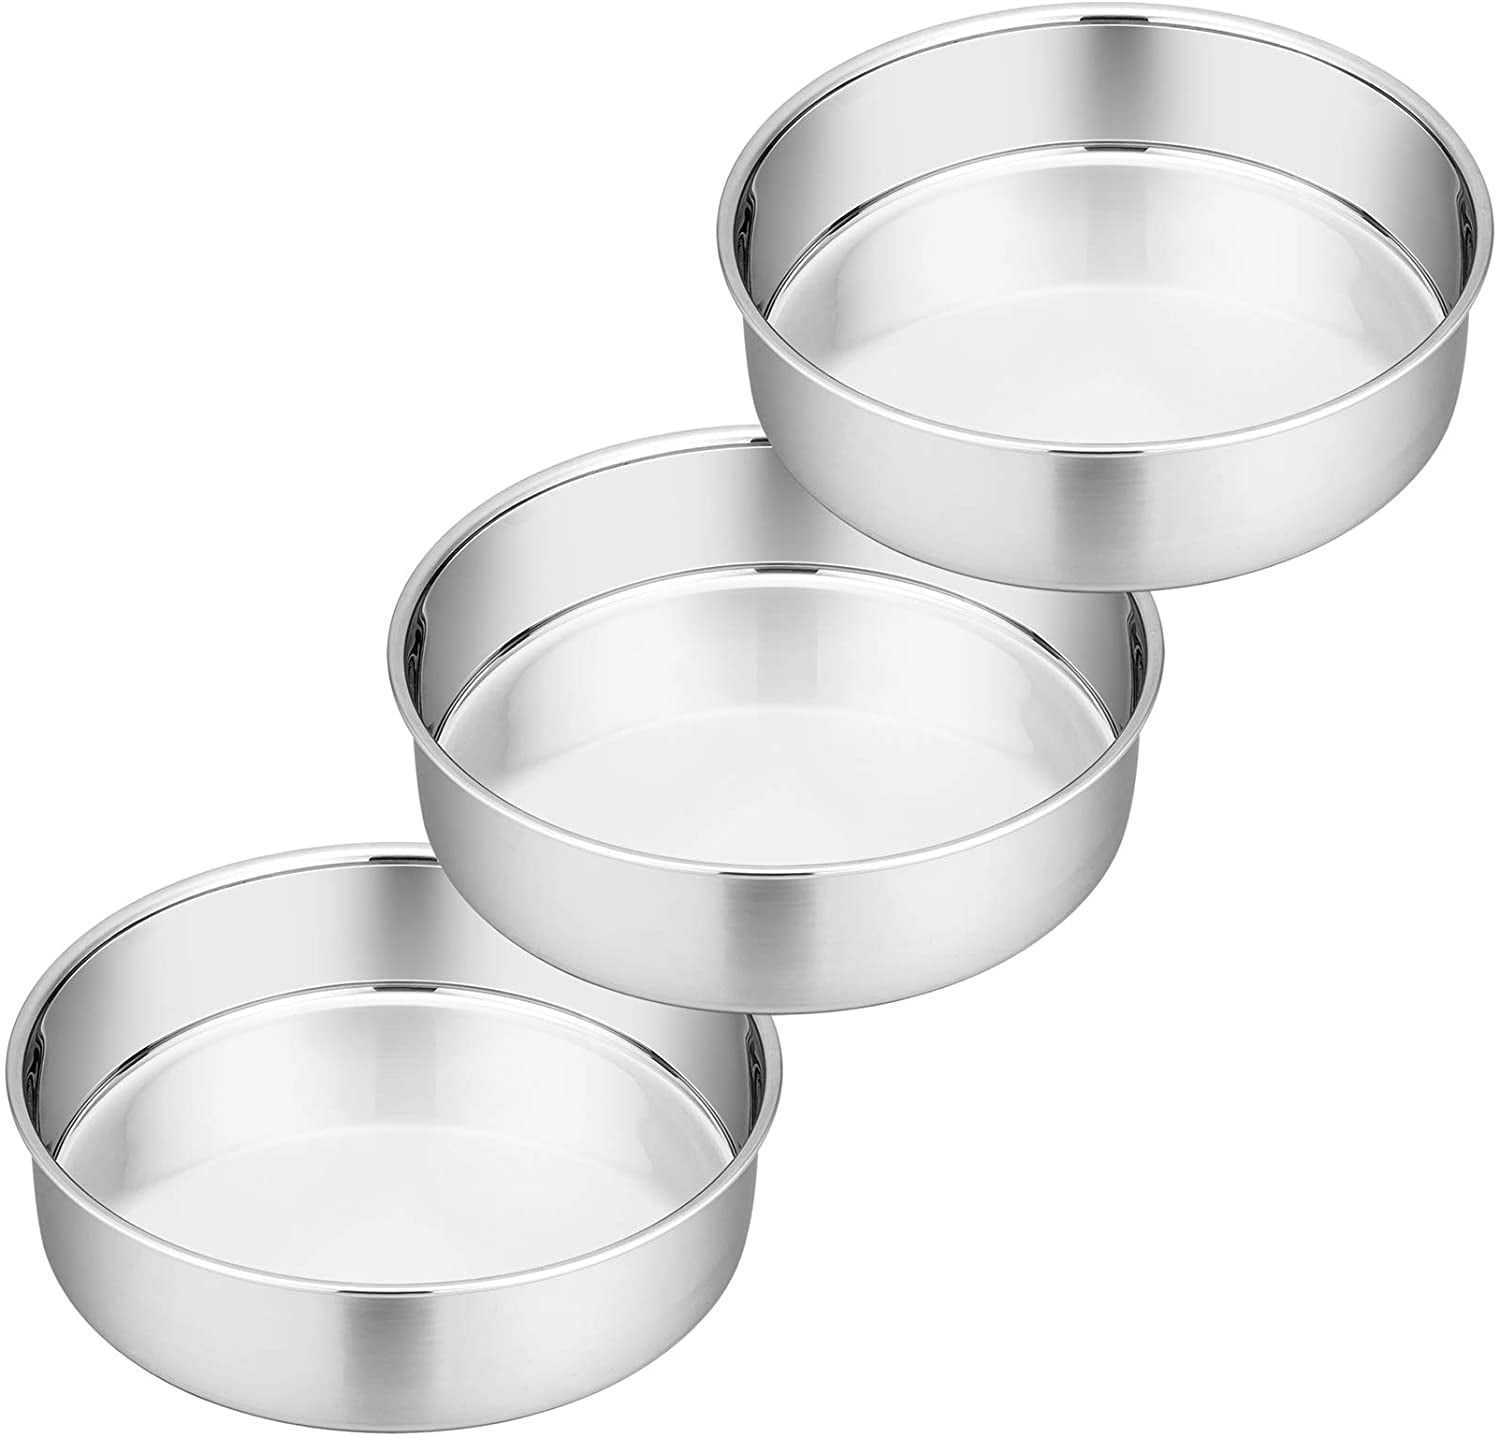 Lot of 3 A+Seller. Details about   Cooking Concepts Round Cake Pans 8" inches 